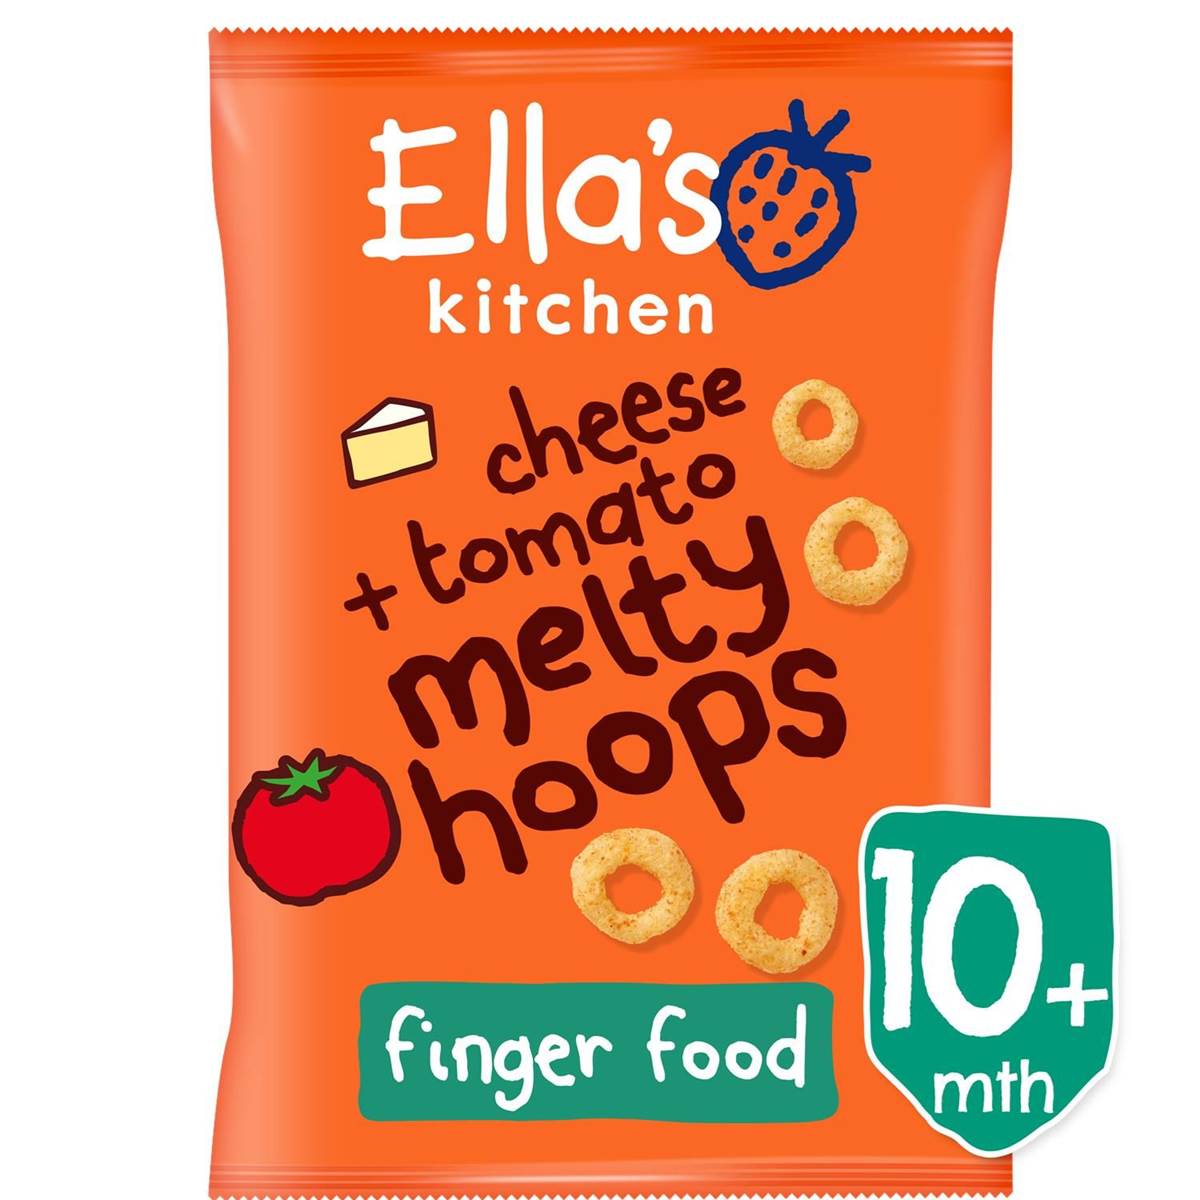 Ellas Kitchen Cheese + Tomato Melty Hoops - 20g